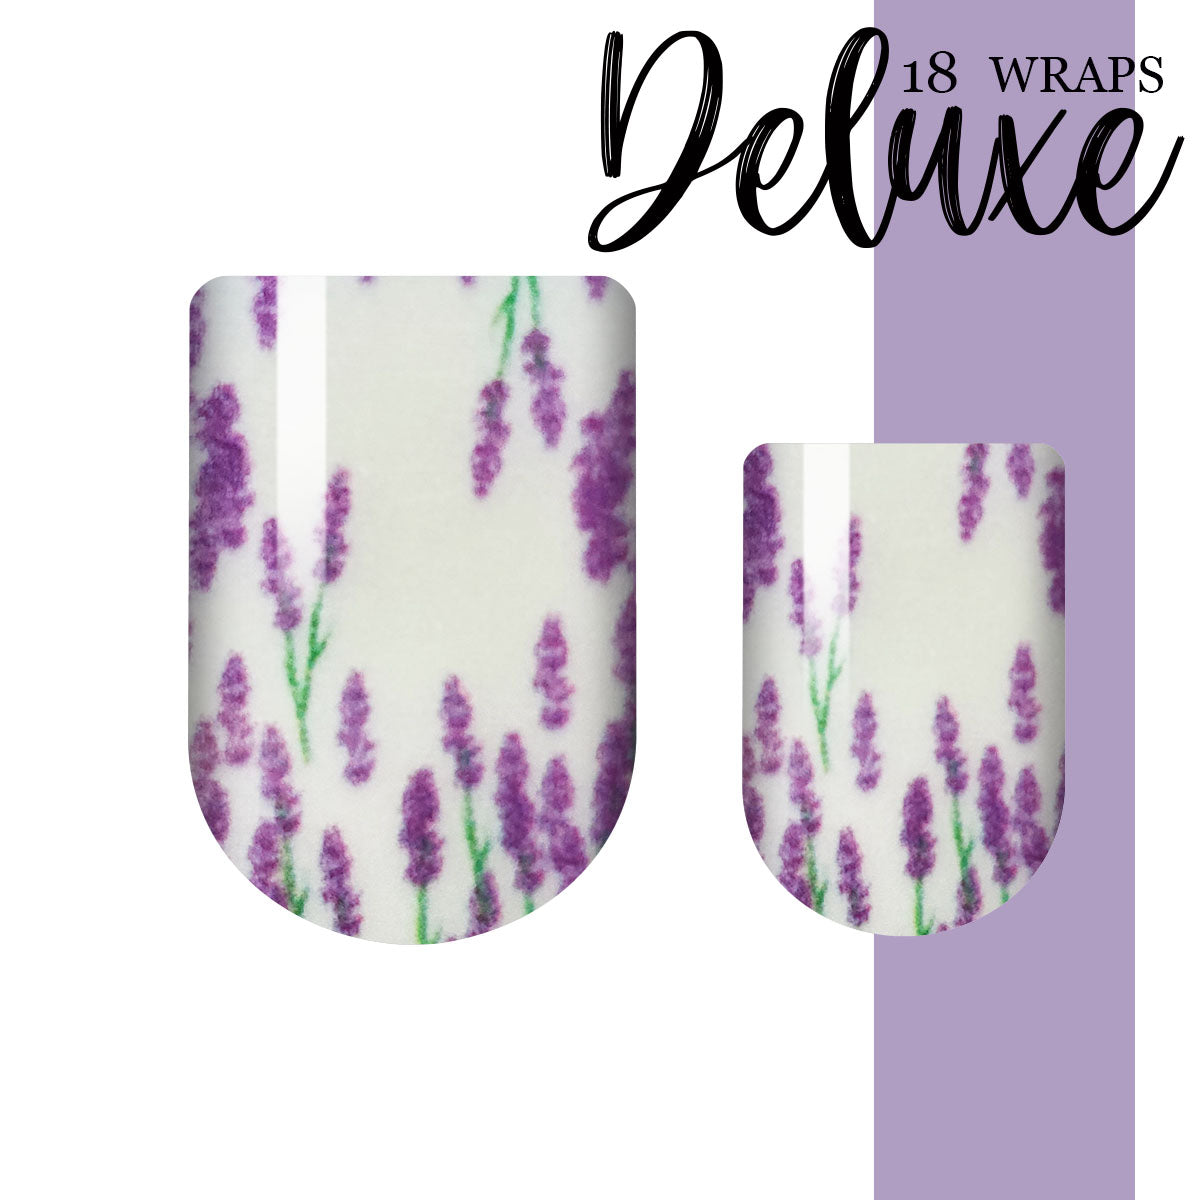 Lavender Fields Deluxe Nail Wrap